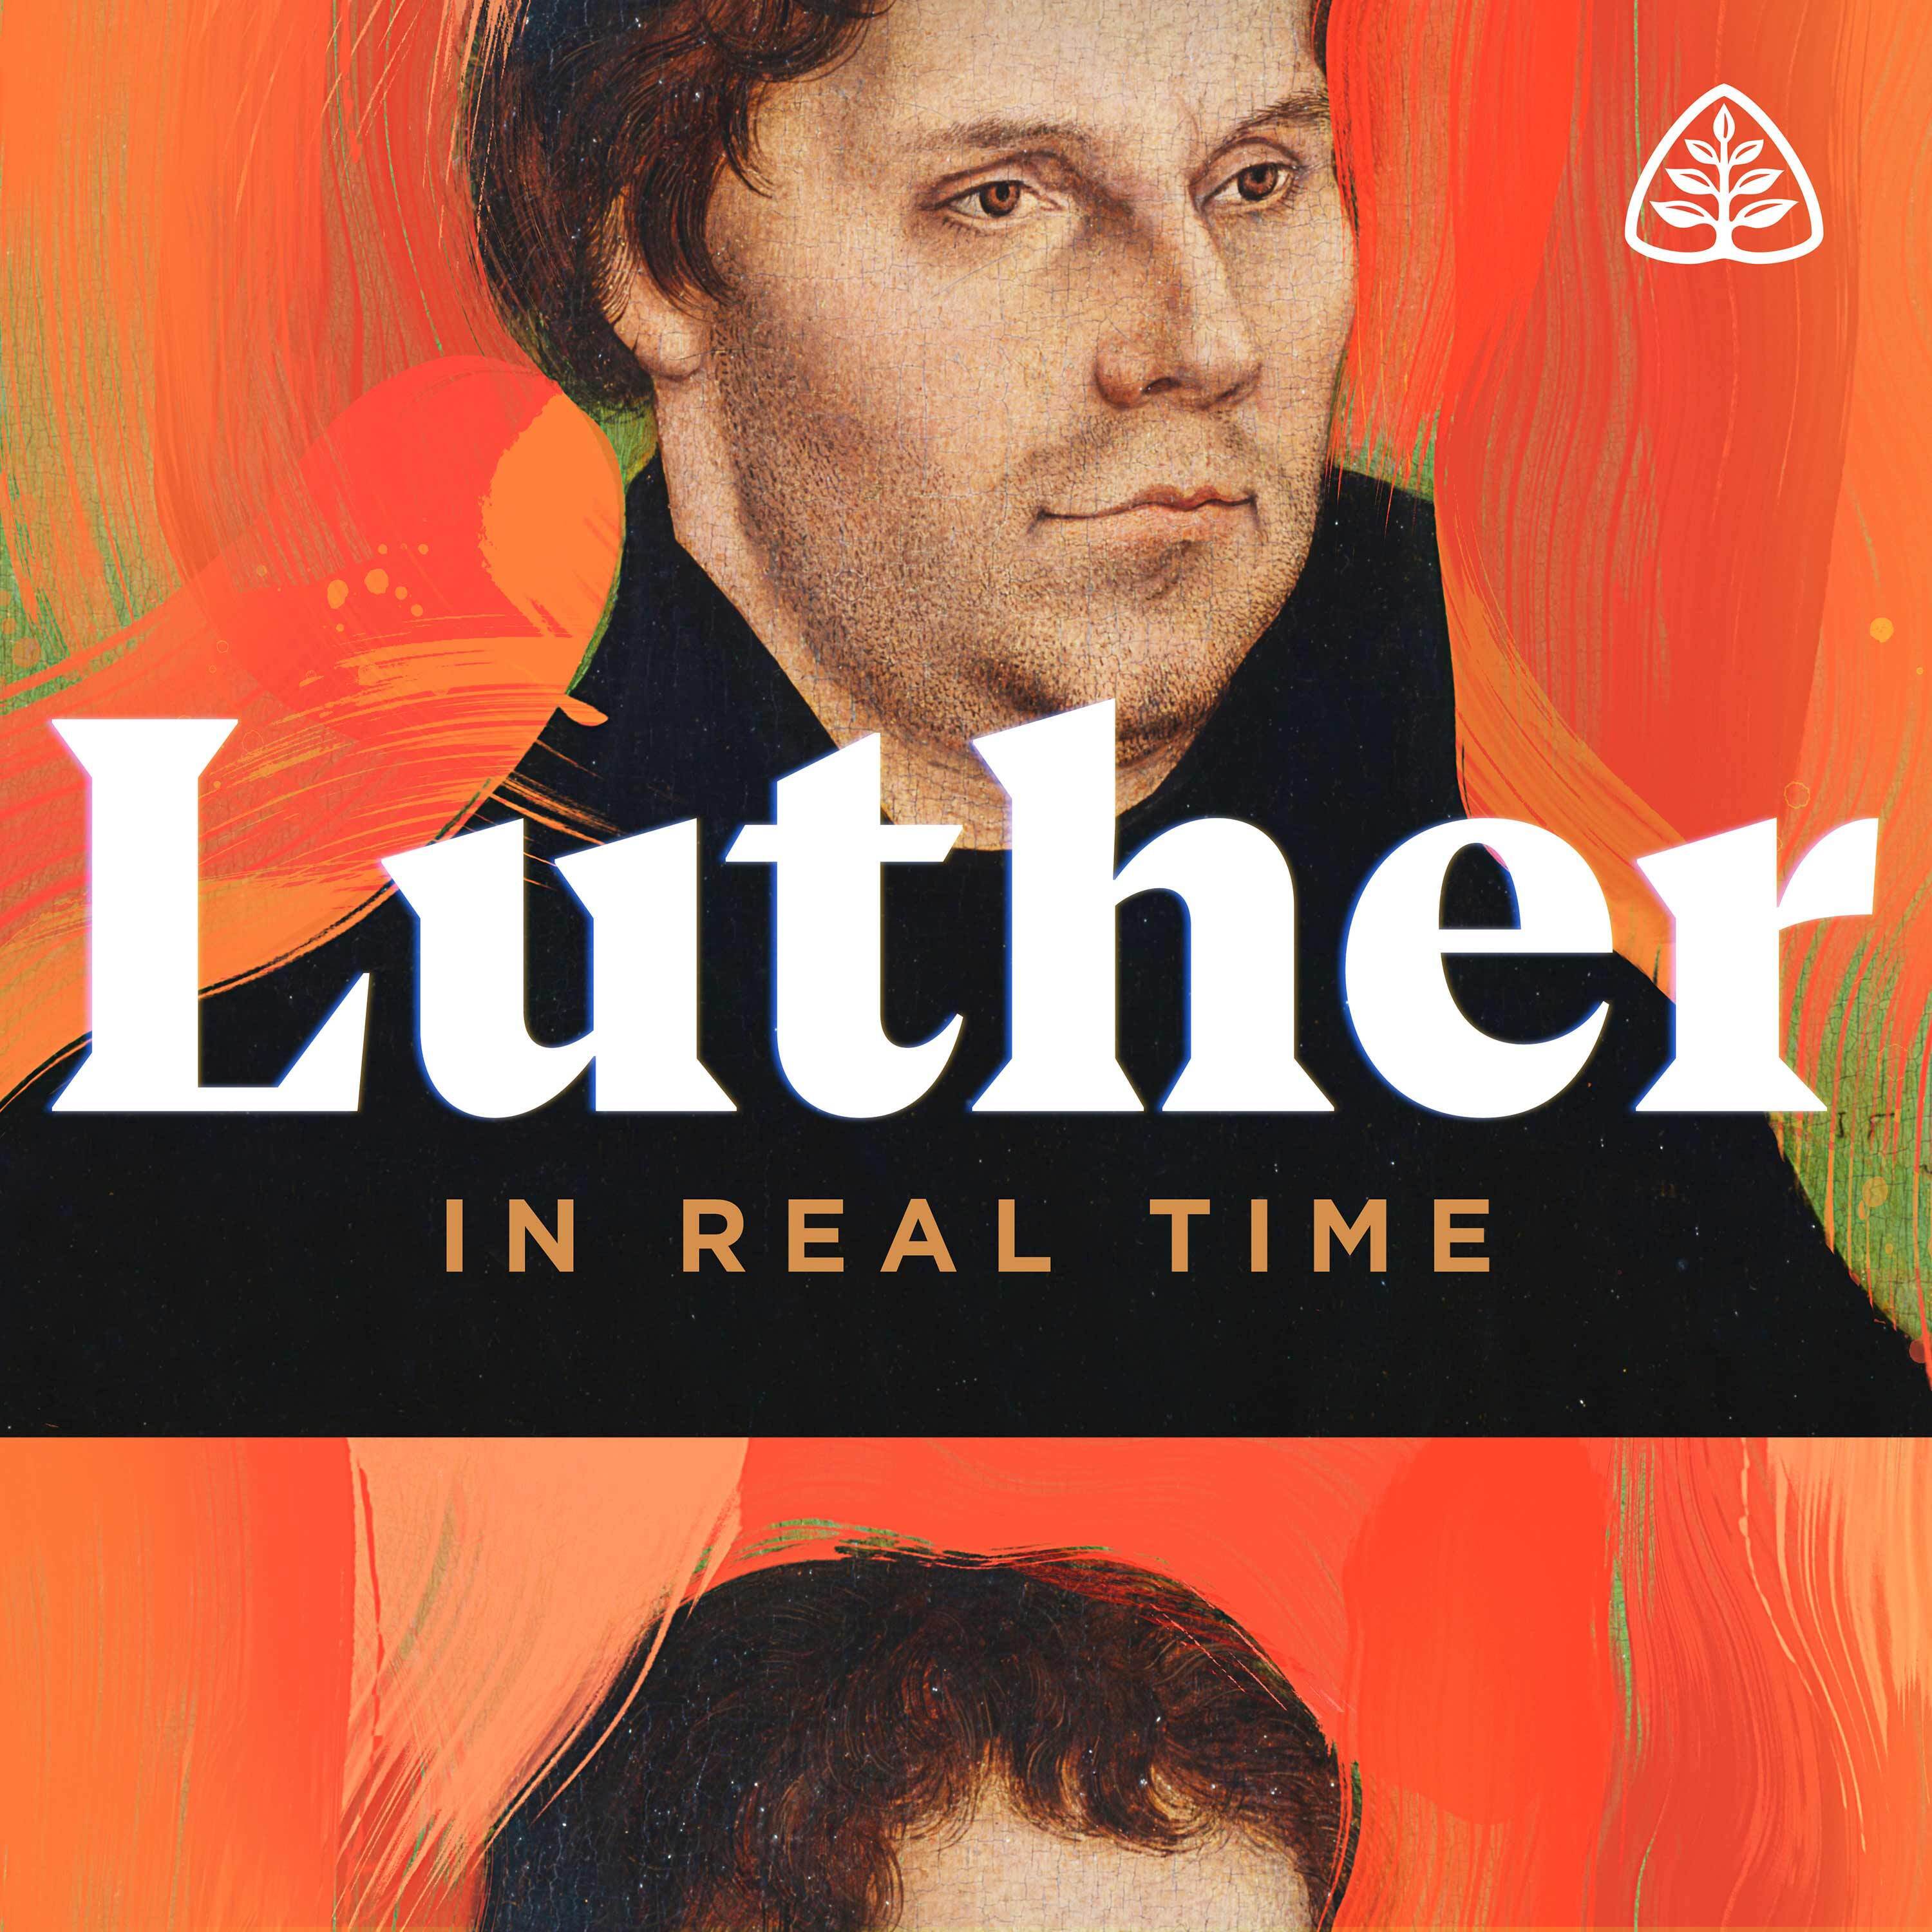 Luther in Real Time